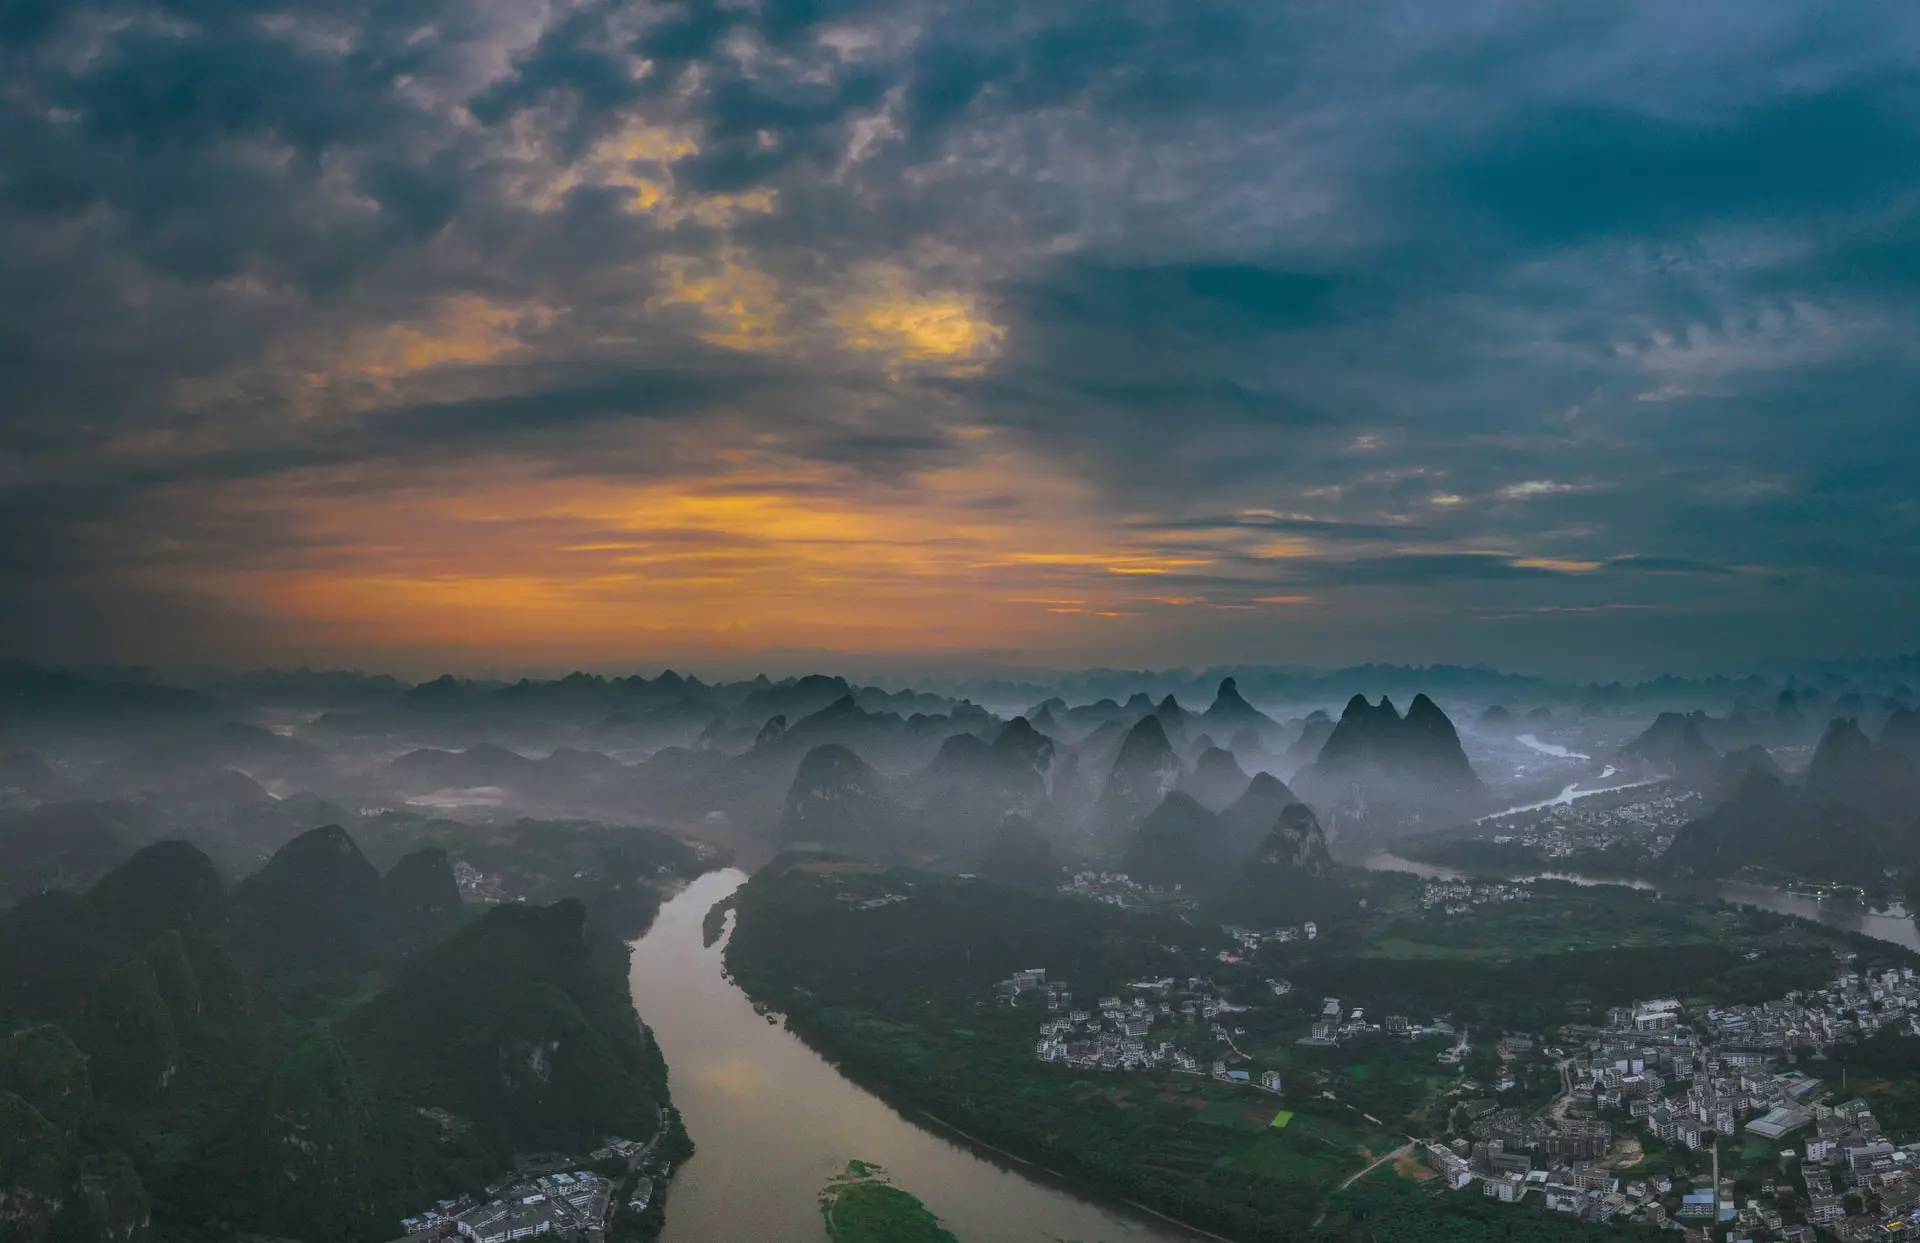 WHAT ARE THE TOP ATTRACTIONS TO VISIT IN GUILIN?